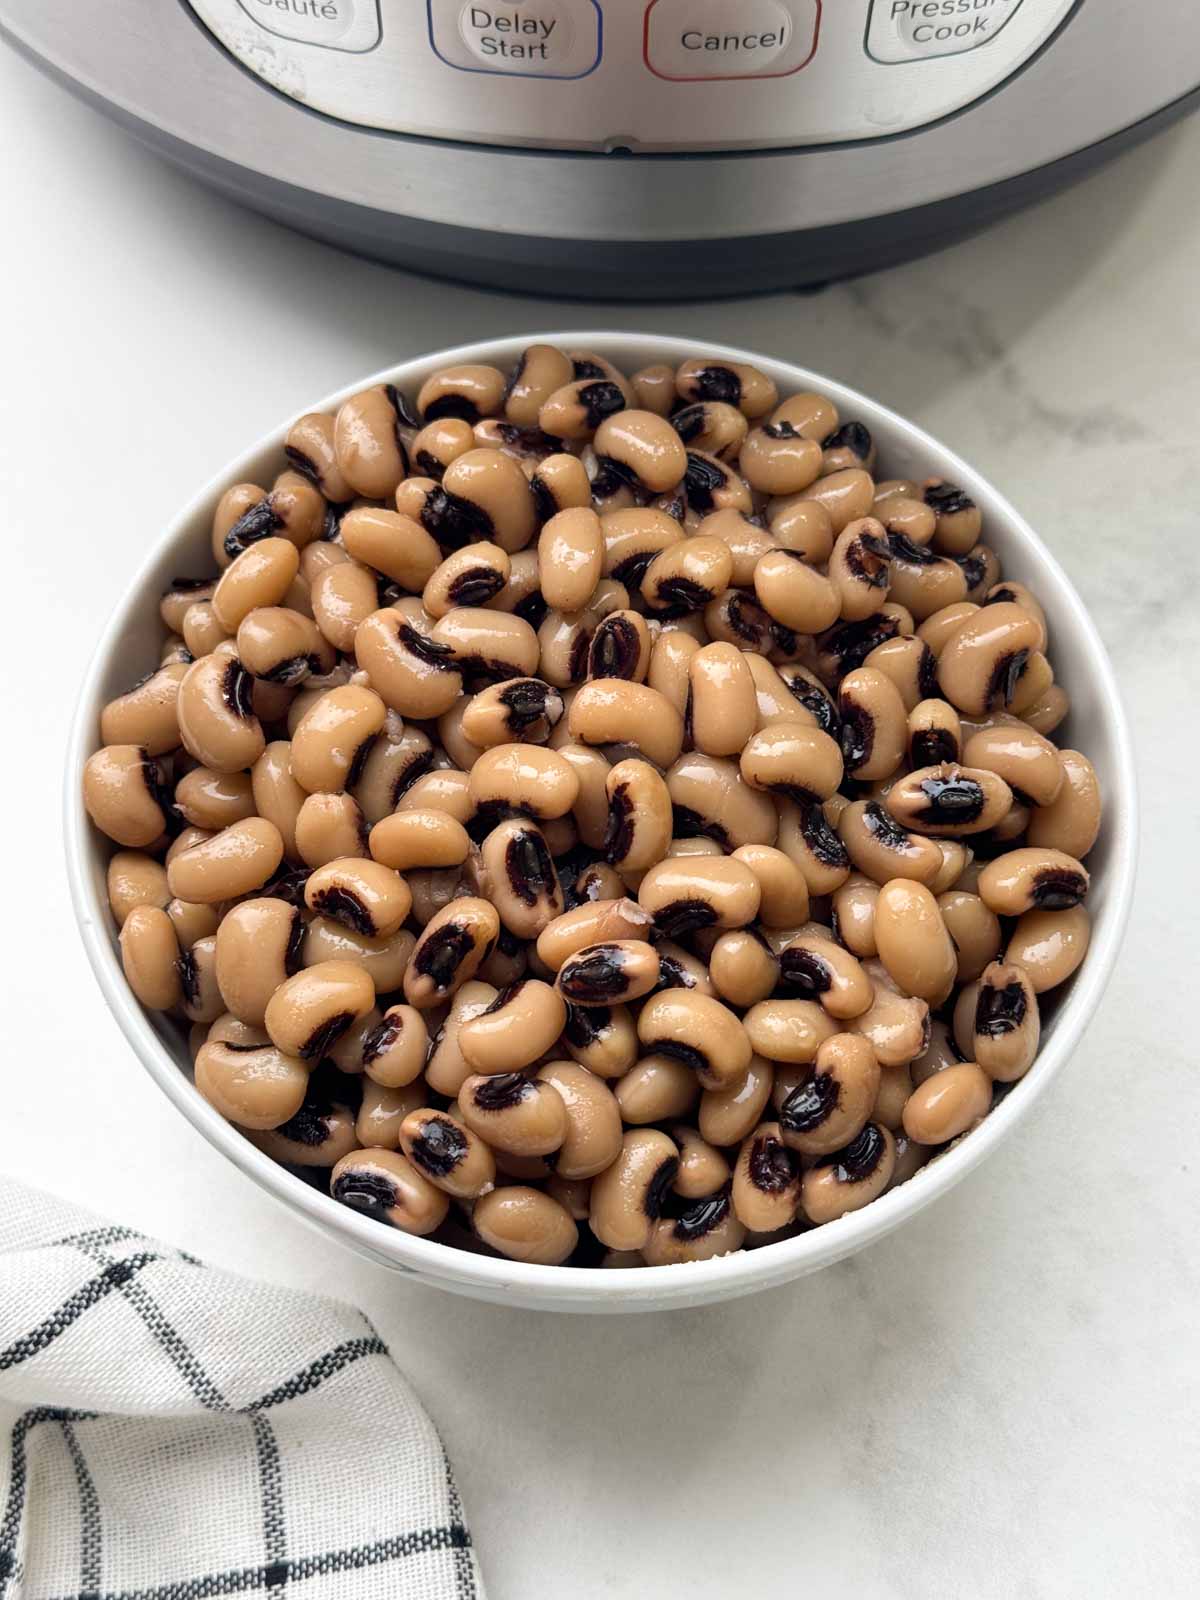 black eyed peas in a bowl with instant pot behind